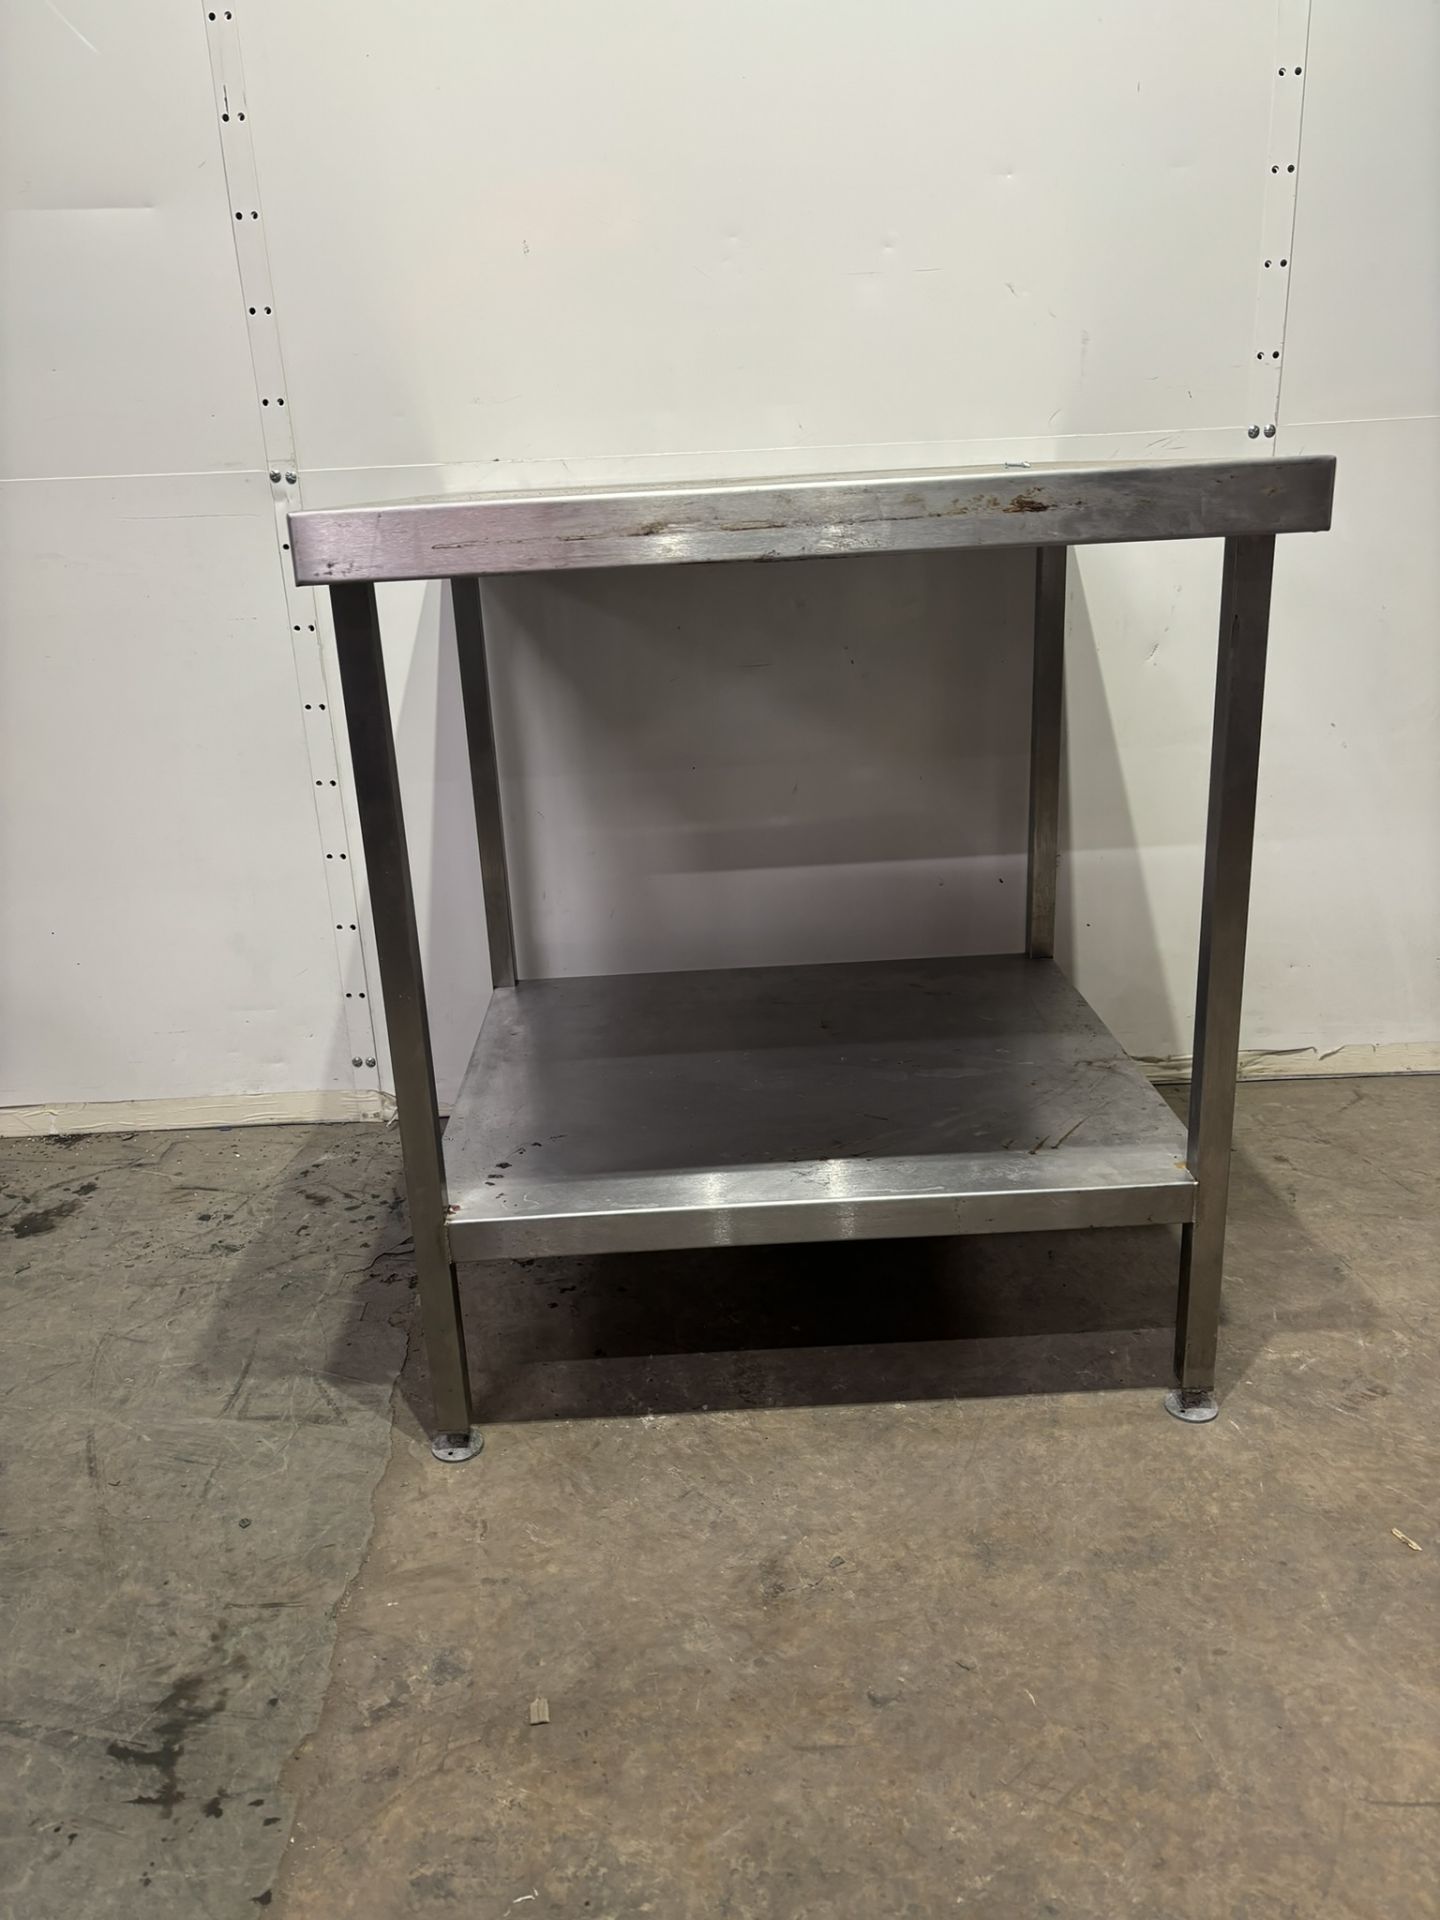 Commercial Stainless Steel Catering Preperation Table - Bild 3 aus 3